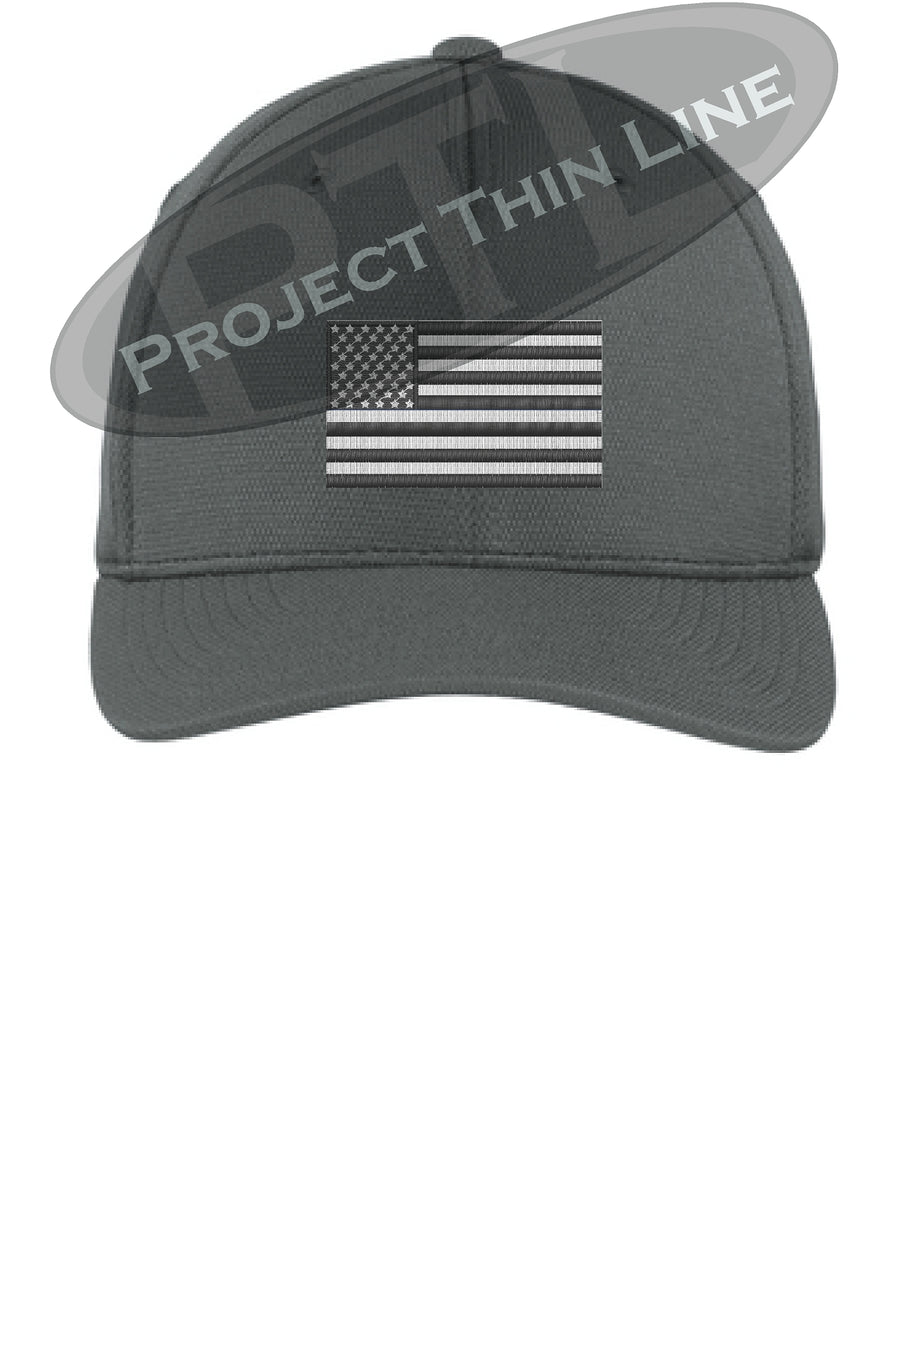 Black Embroidered Tactical / Subdued American Flag Flex Fit Fitted Hat